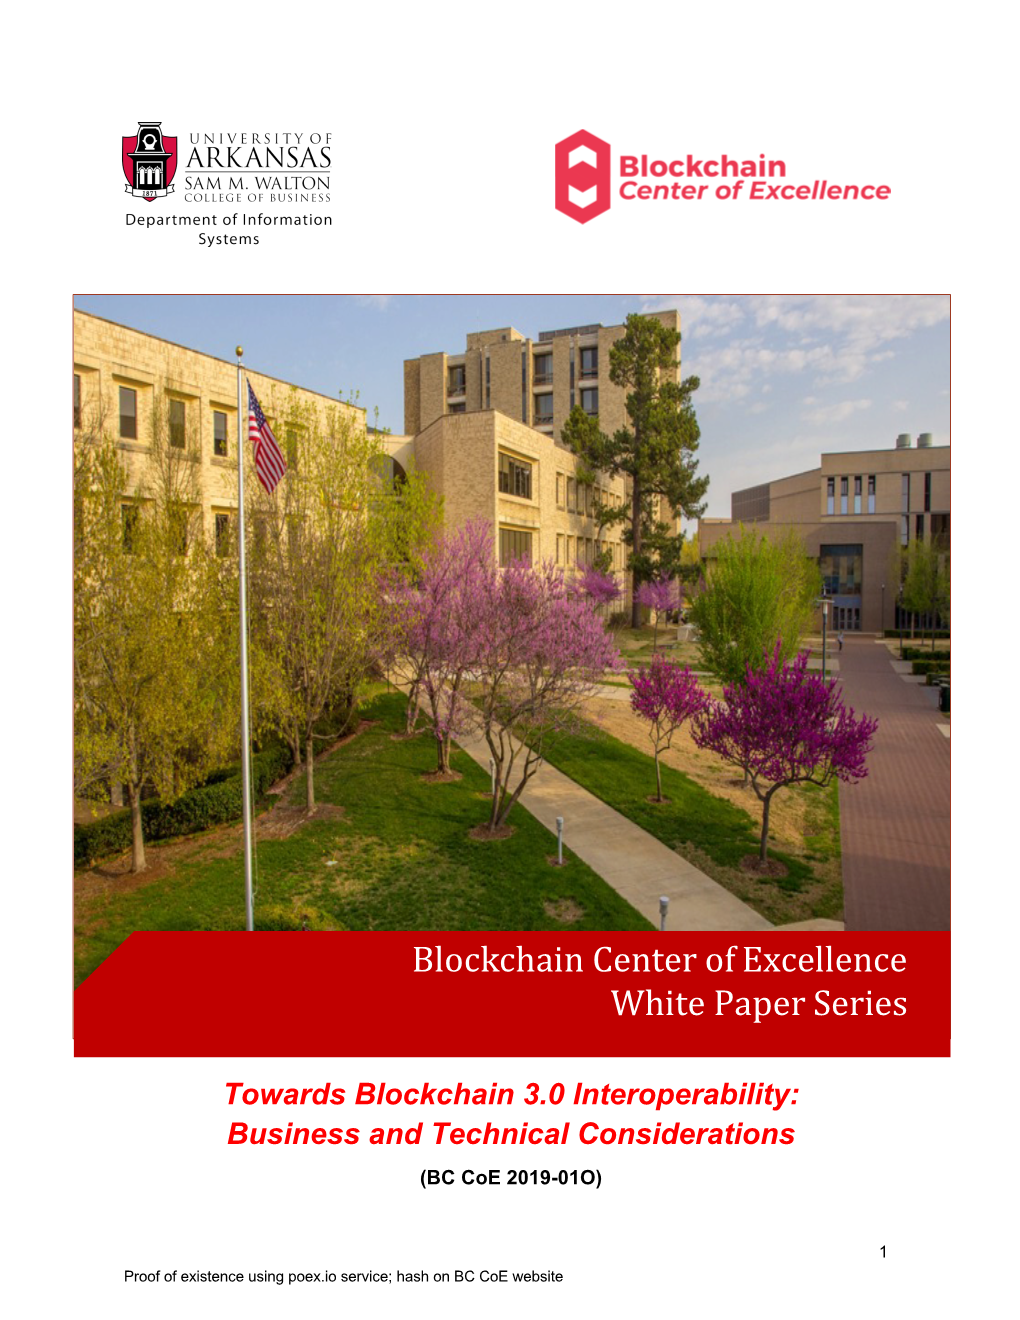 Blockchain Center of Excellence White Paper Series